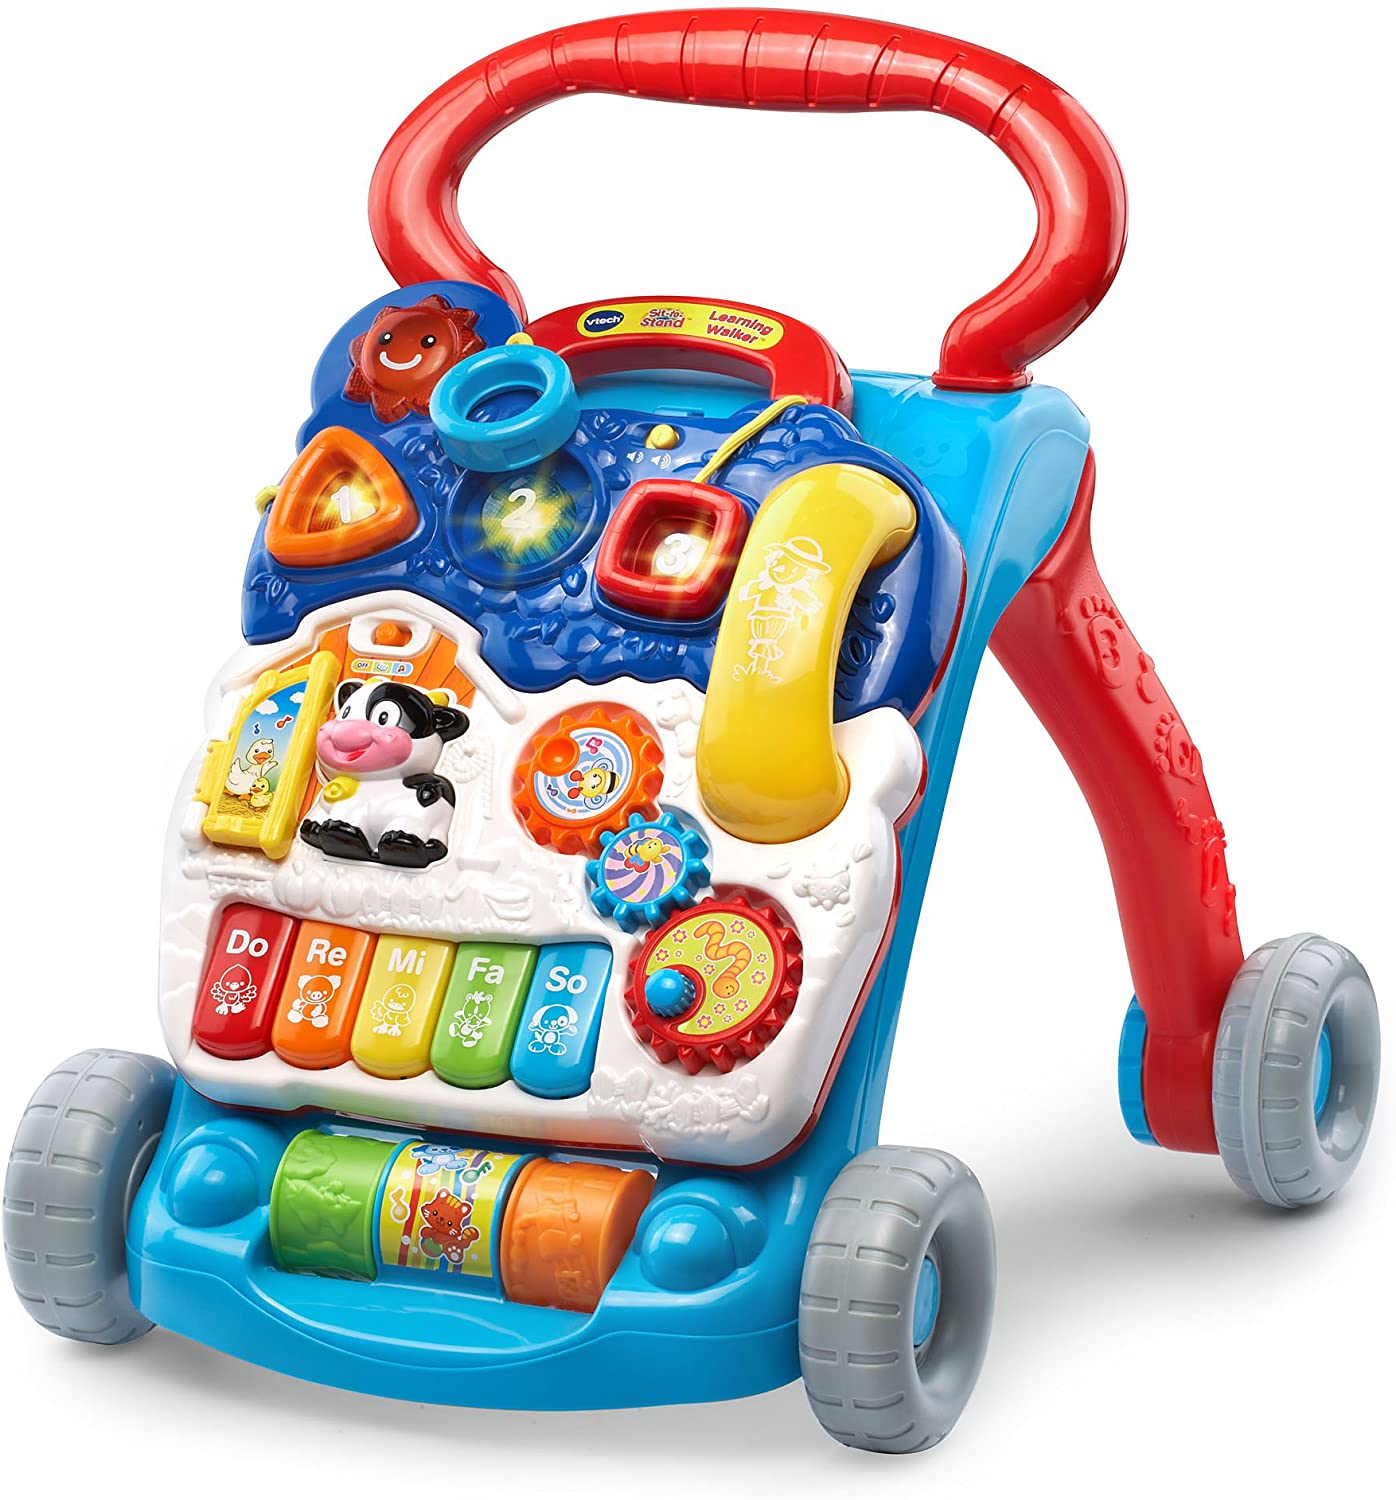 VTech Play Panel Walker Toy For 1-Year-Old Boy